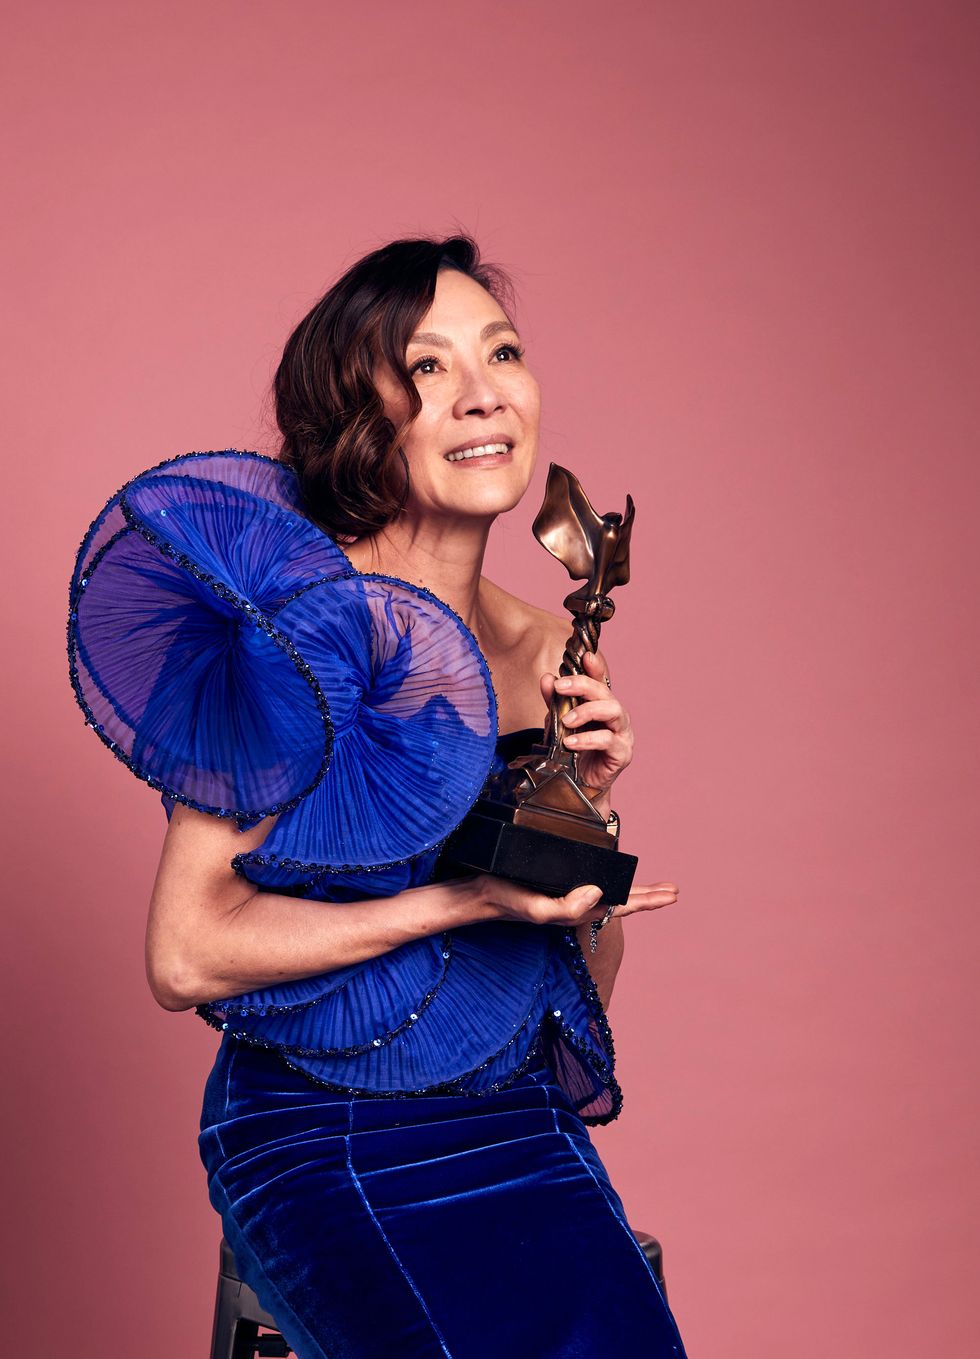 santa monica, california march 04 michelle yeoh, winner of the best lead performance award for “everything everywhere all at once”, poses in the imdb portrait studio at the 2023 independent spirit awards on march 04, 2023 in santa monica, california photo by michael rowegetty images for imdb